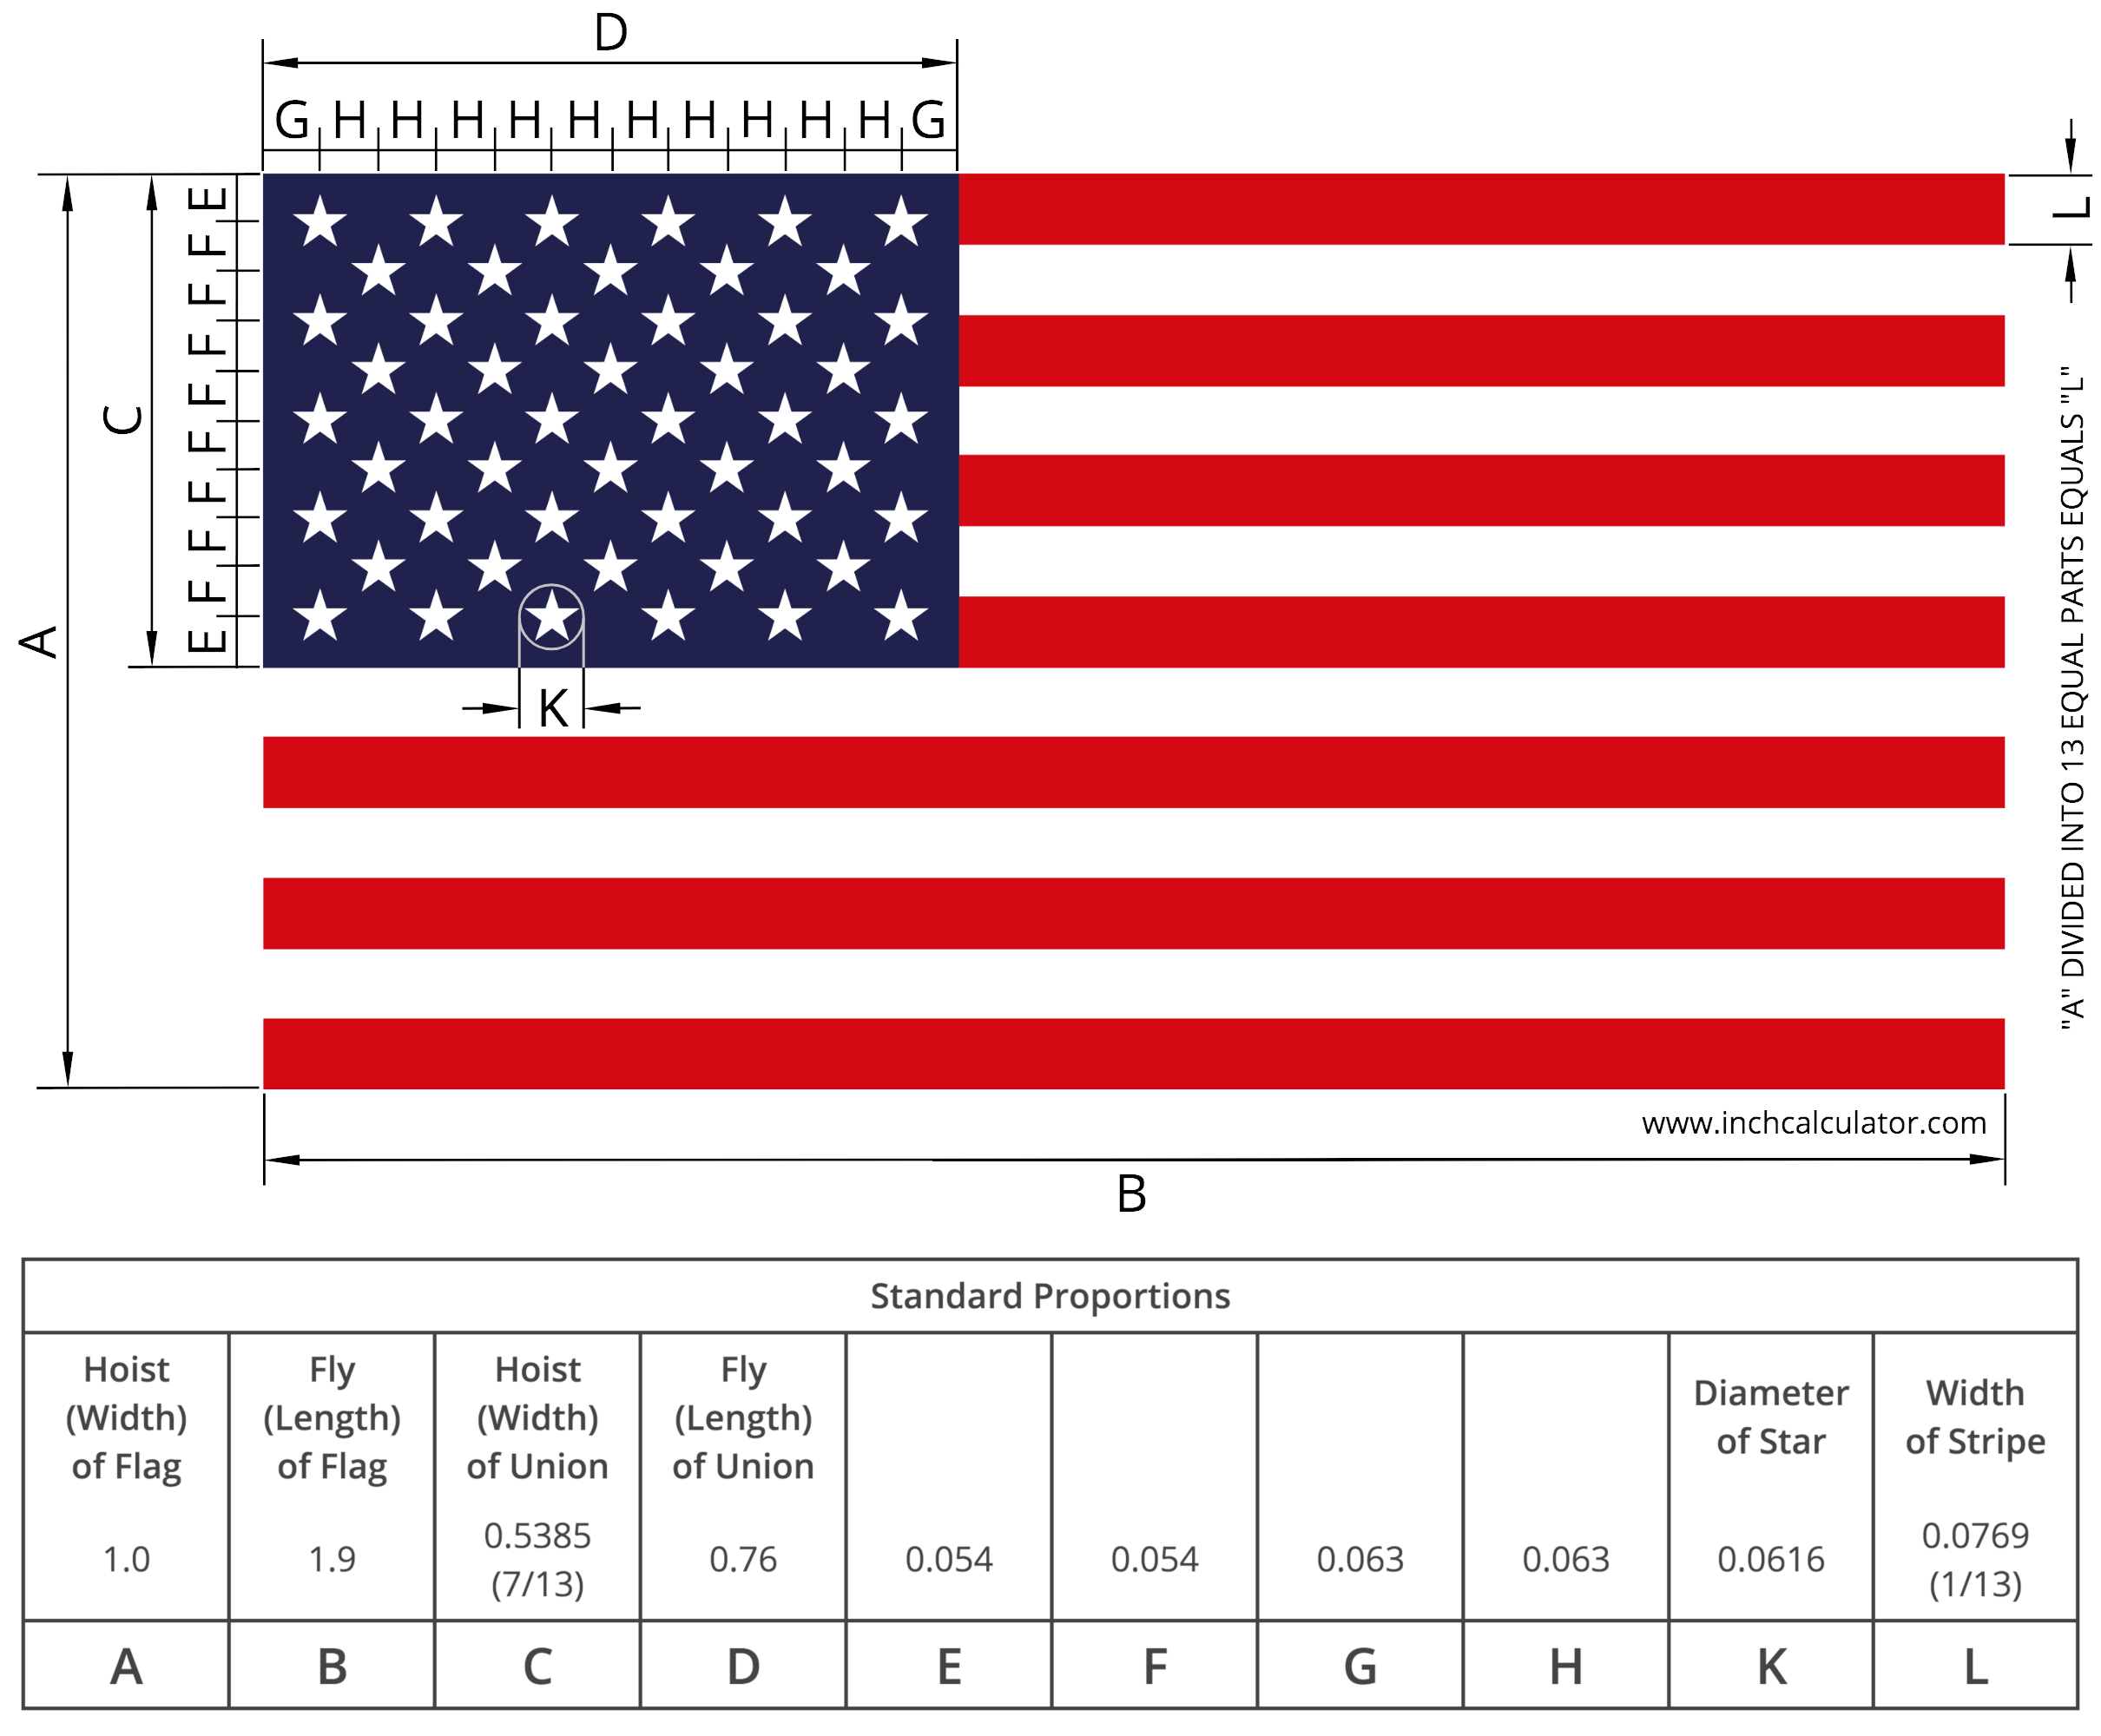 American Flag Size & Proportions Calculator - Inch Calculator The Length Of An American Flag Is 1.9 Times